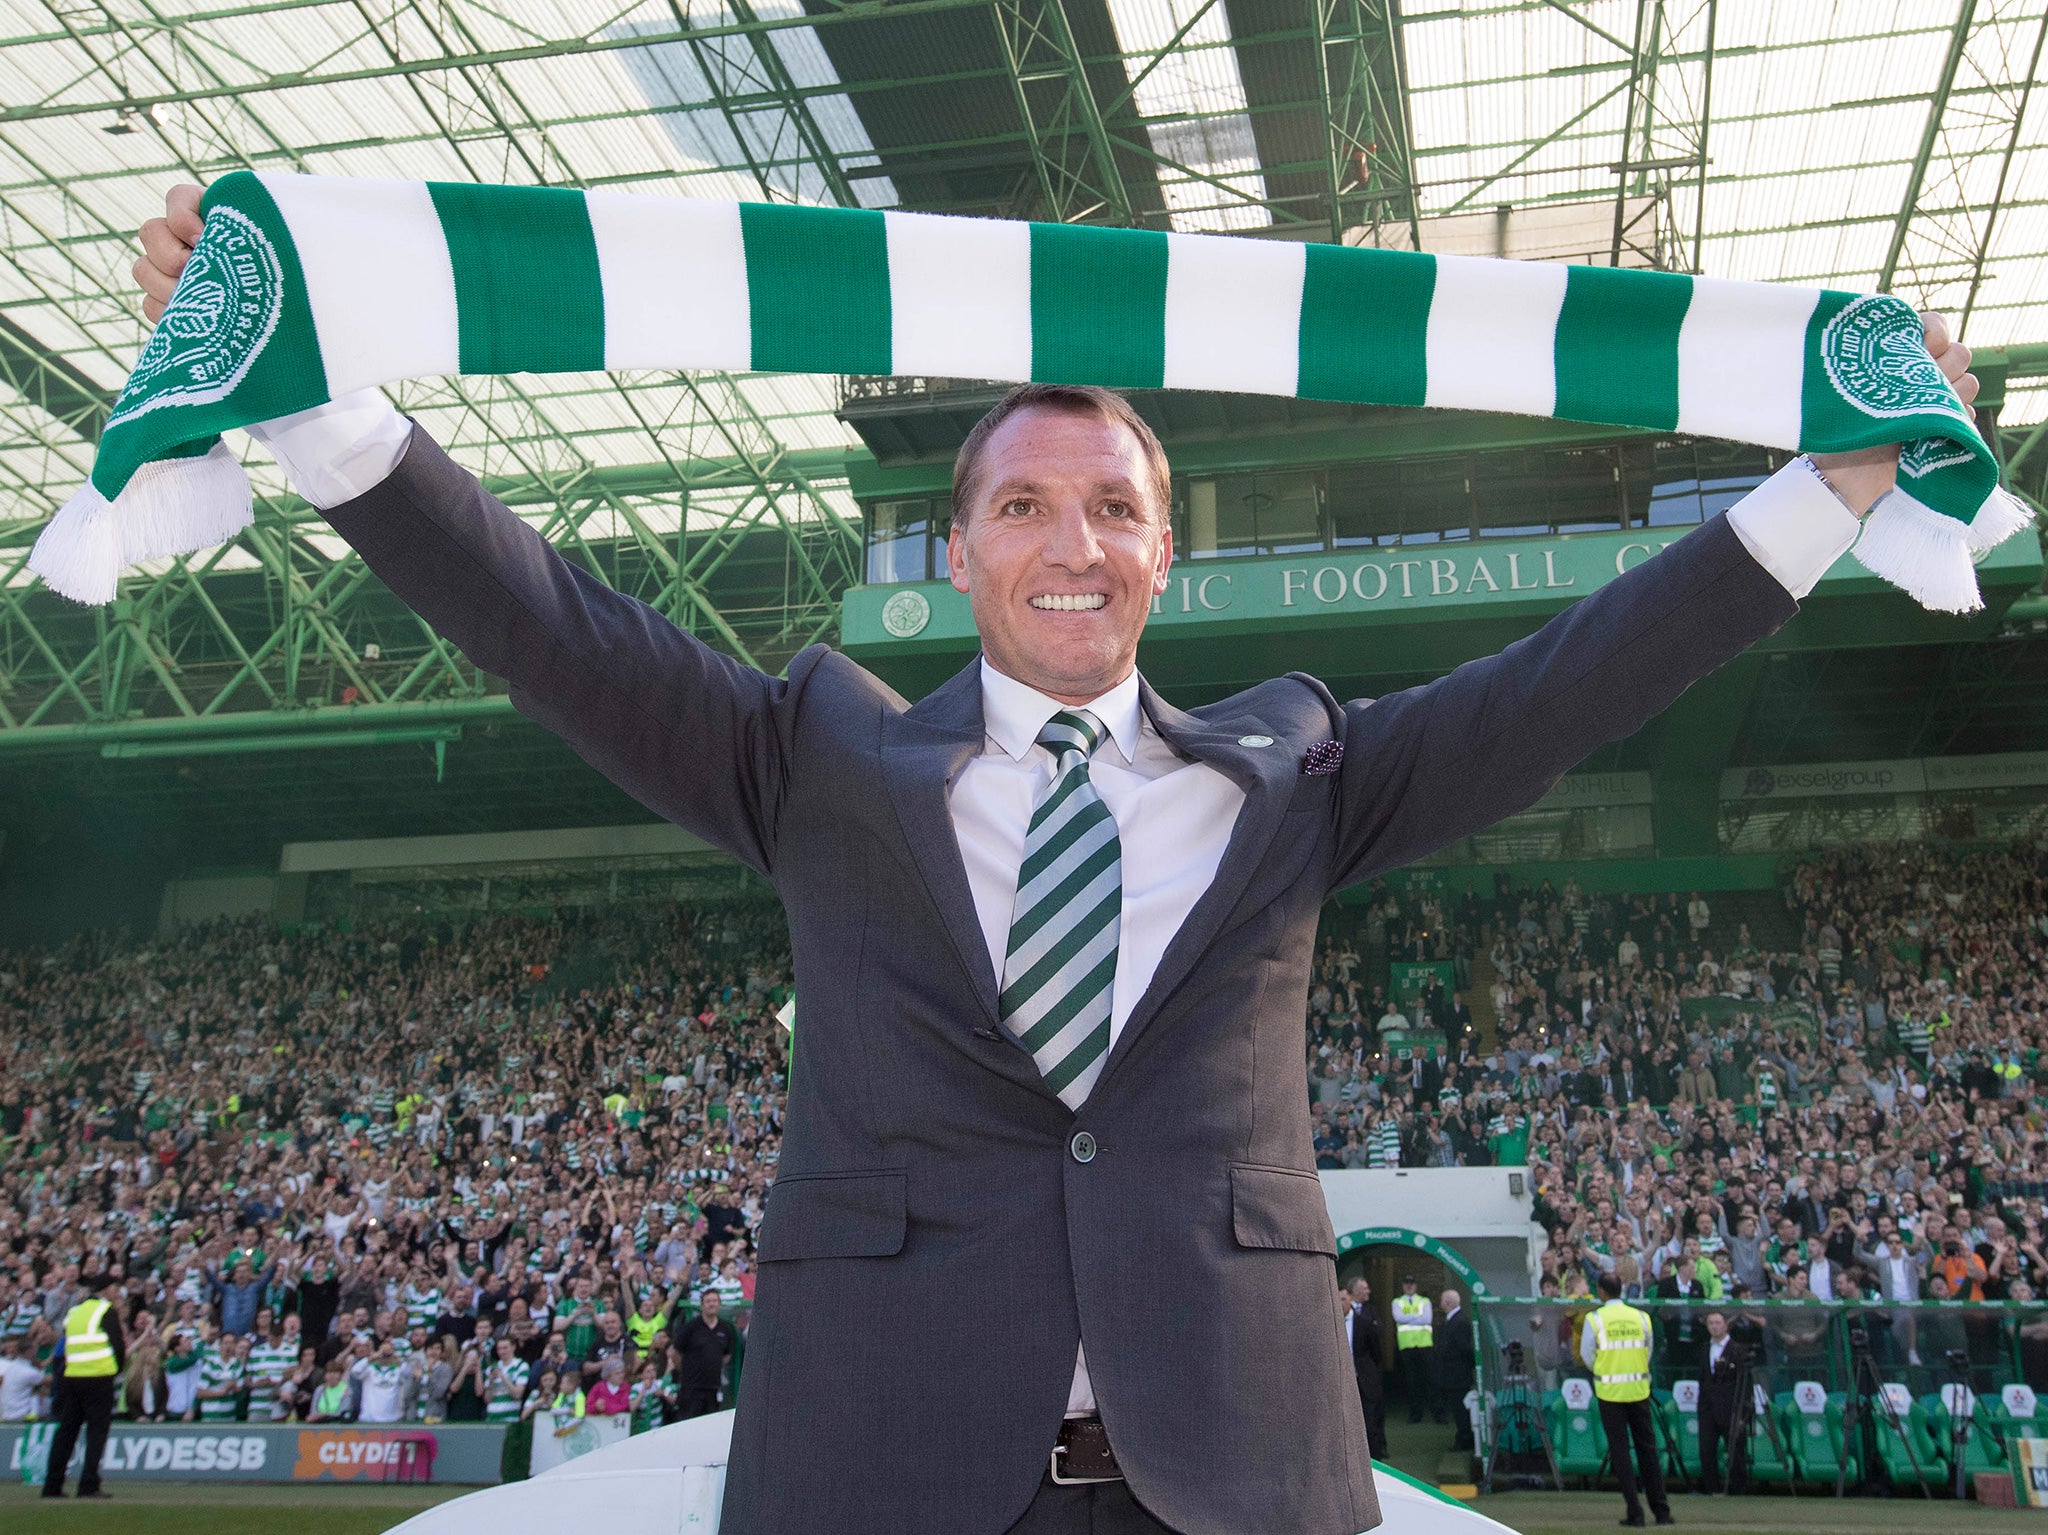 Rodgers suffered embarrassment in his first game in charge of Celtic